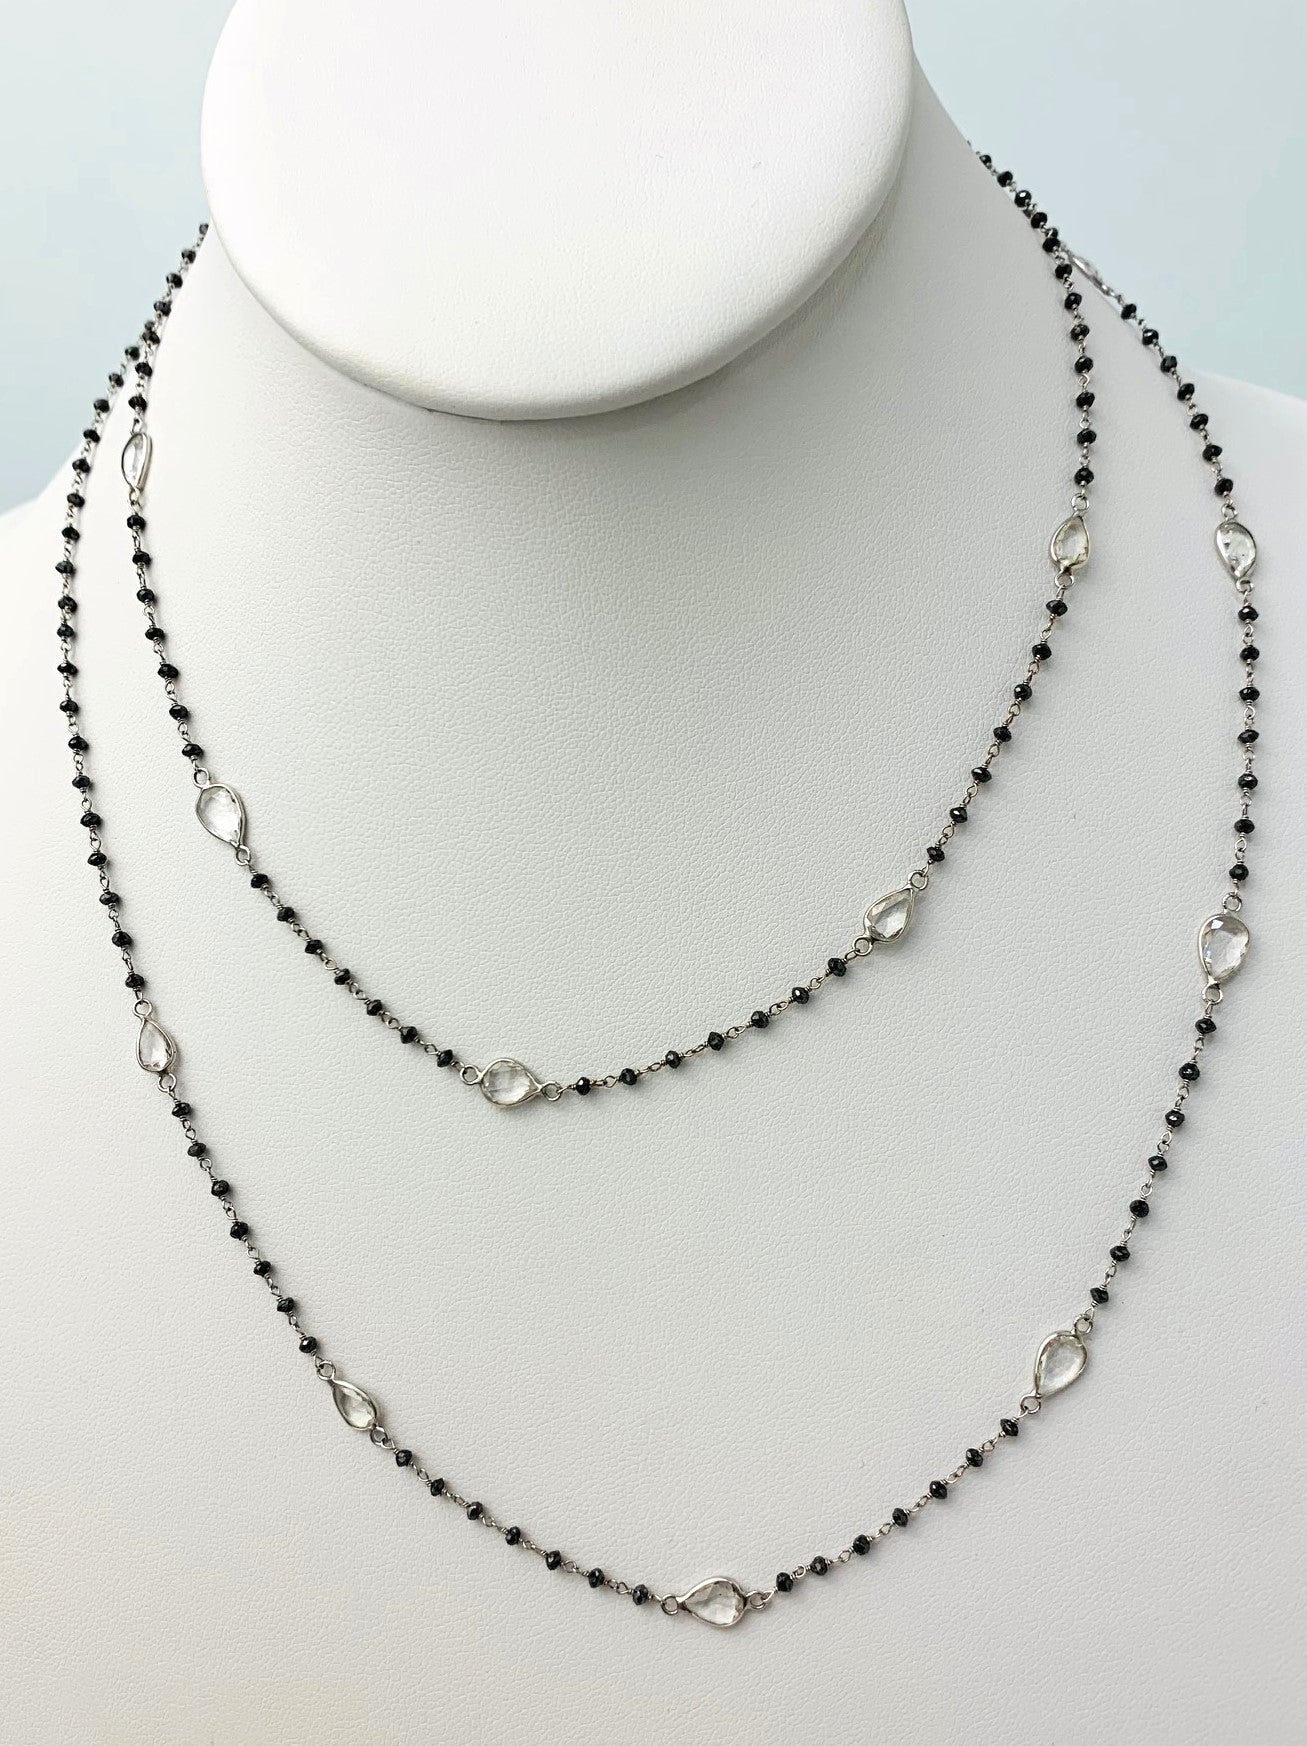 36" Black Diamond Rondelle Rosary Necklace with Pear Shaped White Sapphire Bezel-Set  Rose-Cuts in 14KW - NCK-079-ROSDIAGM14W-BLKWS- 36 10.92ctw